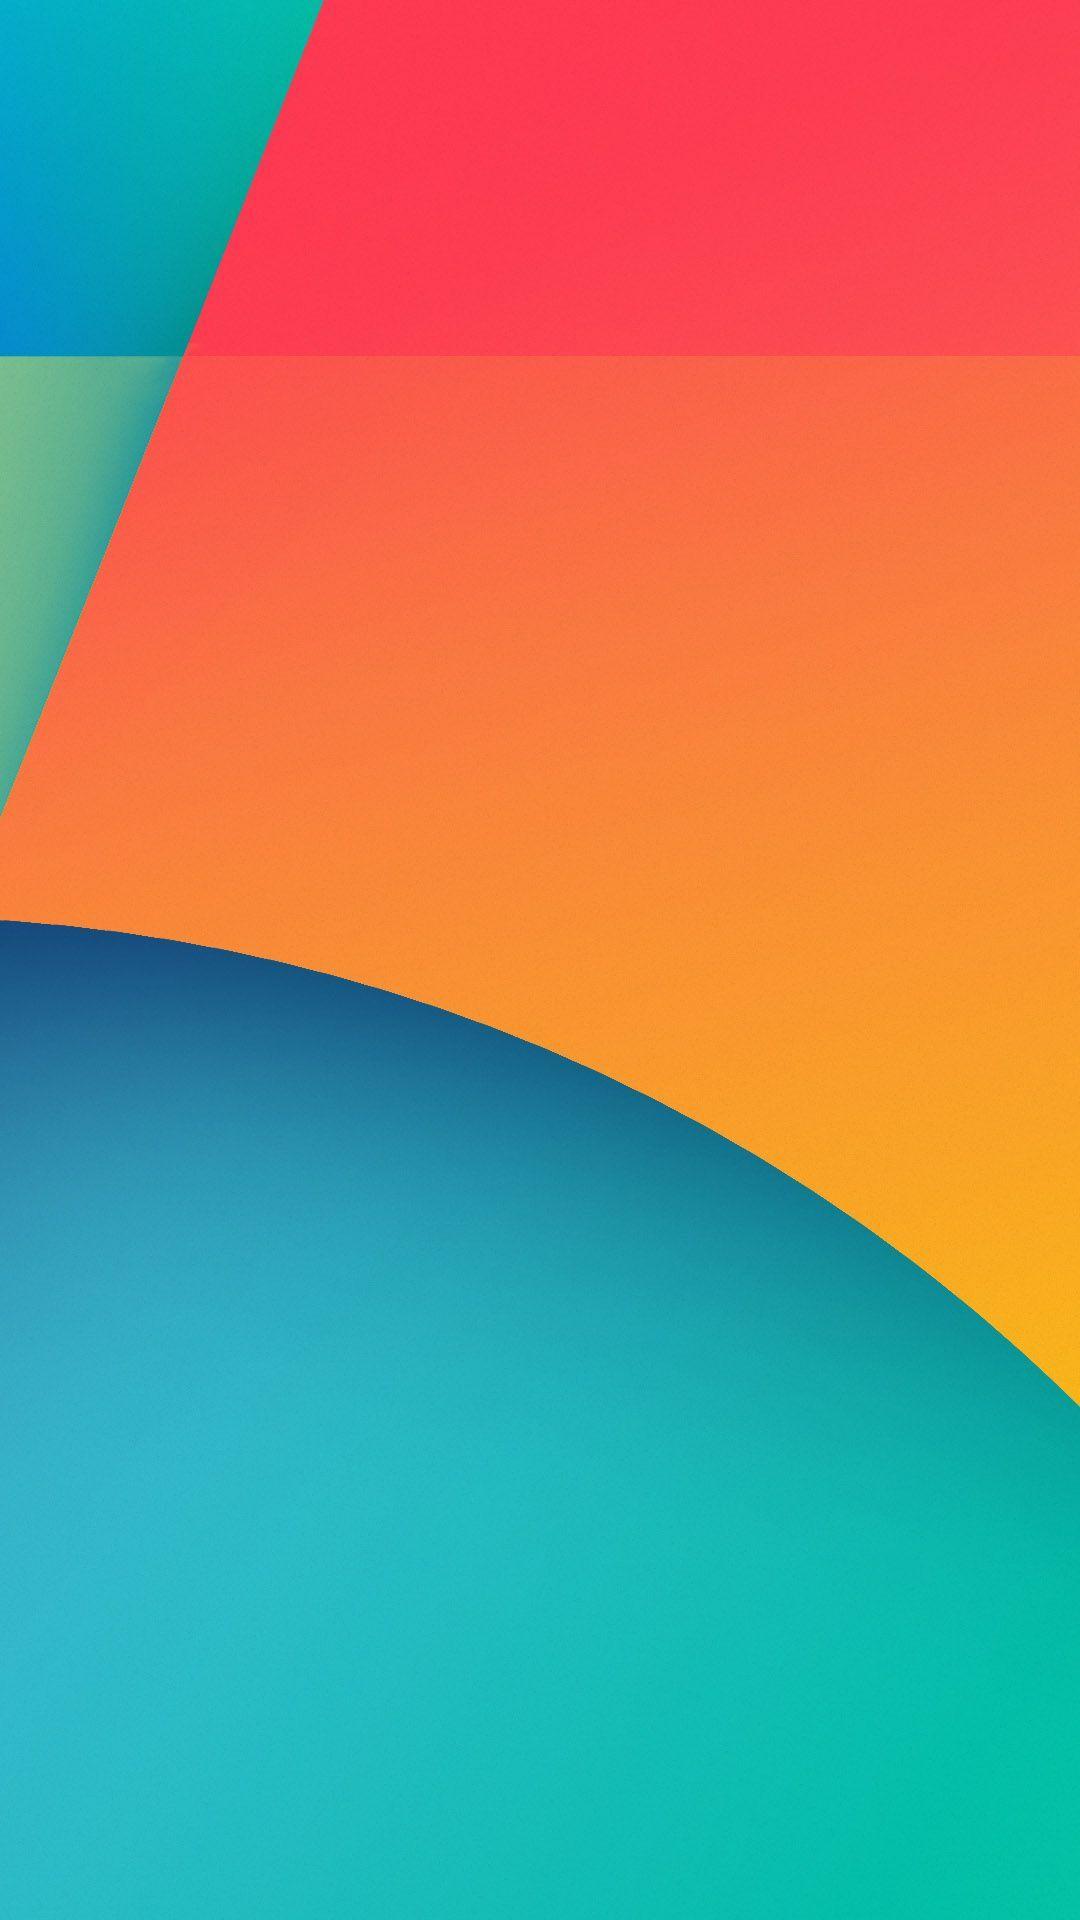 Nexus 5 Android 4.4 KitKat Default 01. Daily Android Wallpaper